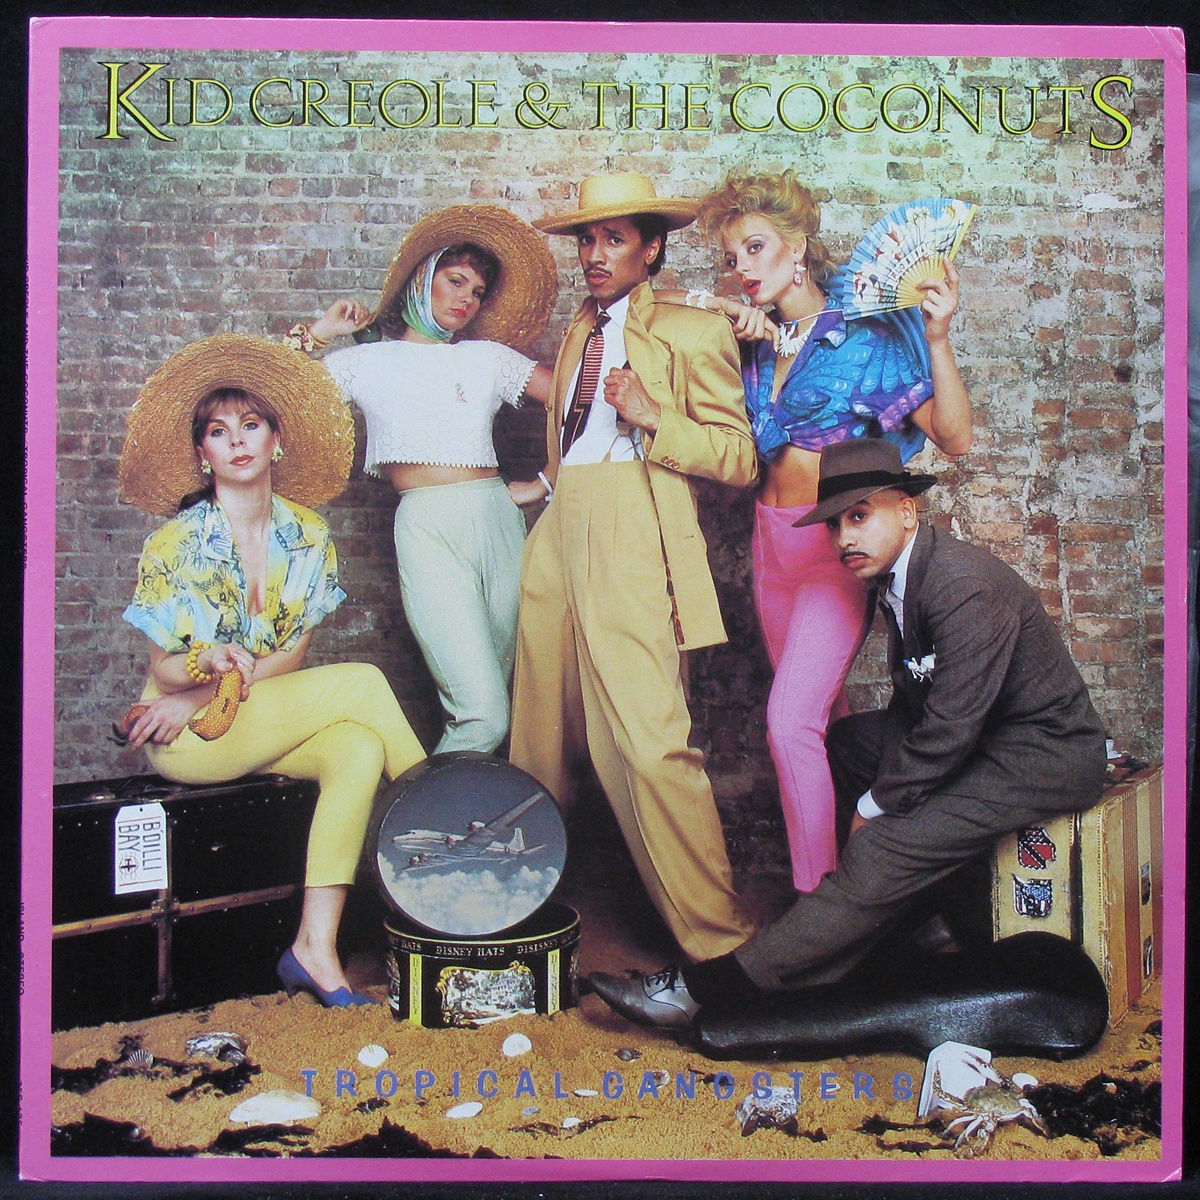 LP Kid Creole & The Coconuts — Tropical Gangsters фото